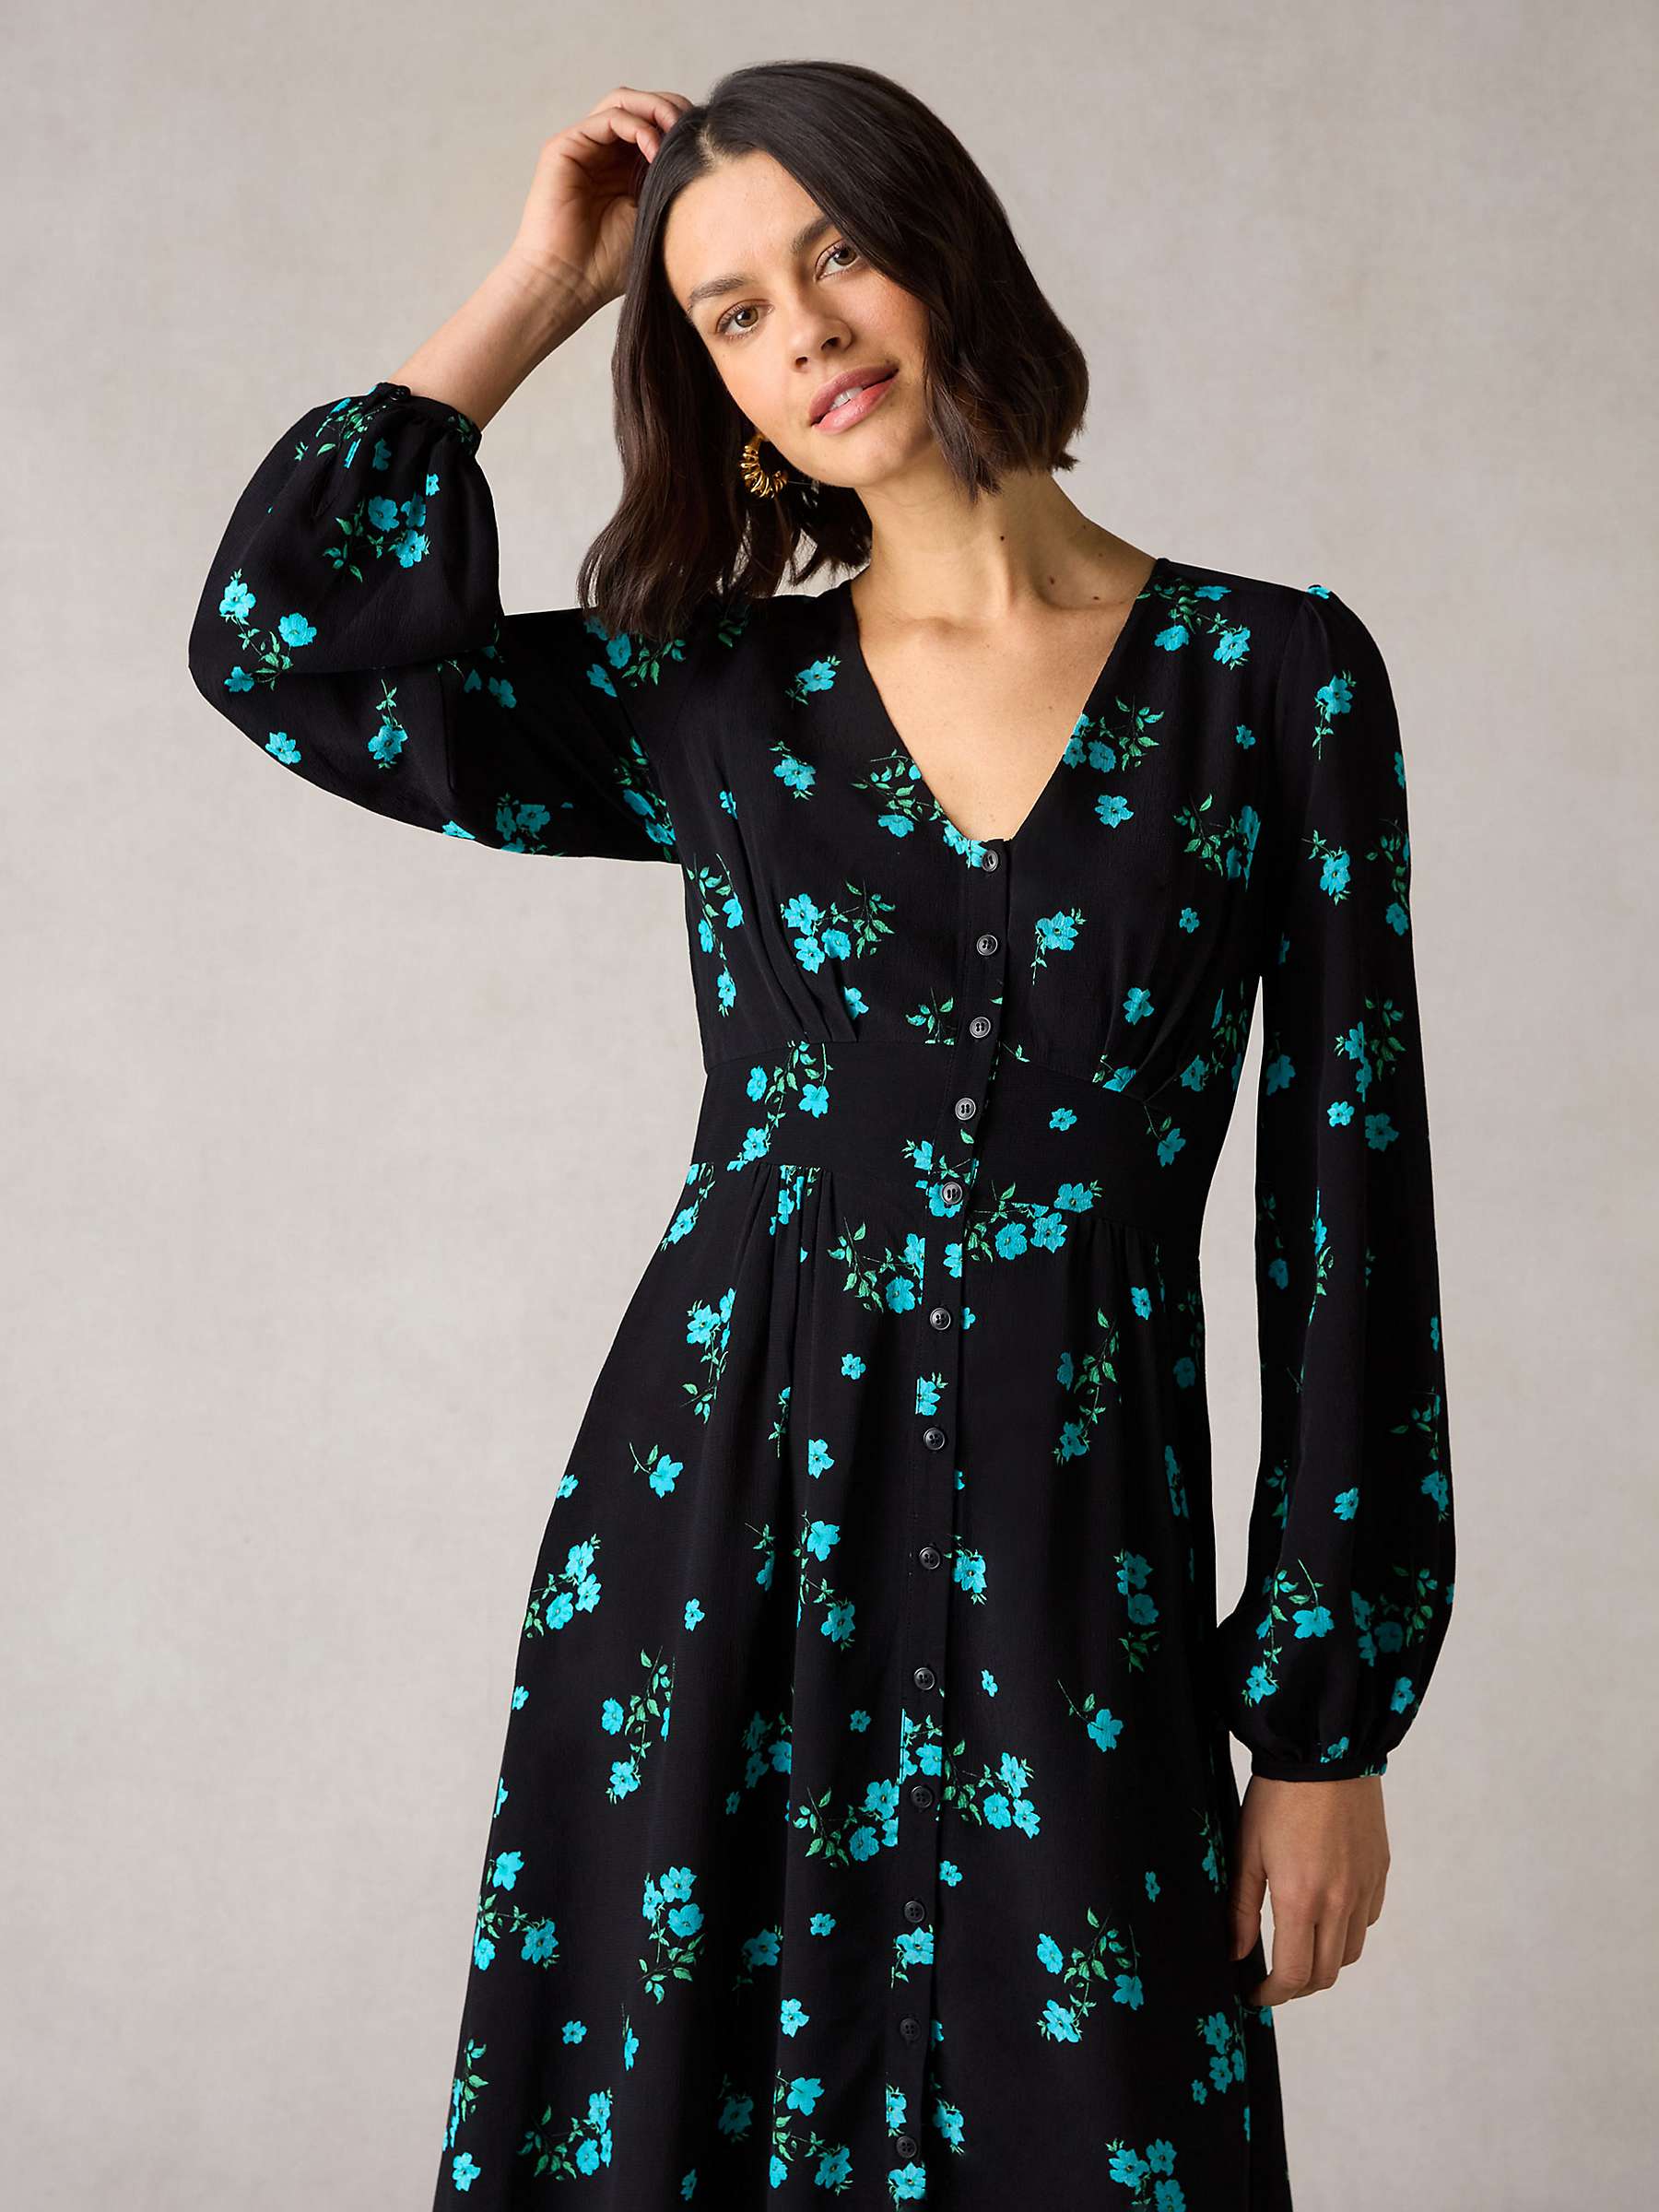 Buy Ro&Zo Petite Cluster Floral Button Front Midi Dress, Black/Multi Online at johnlewis.com